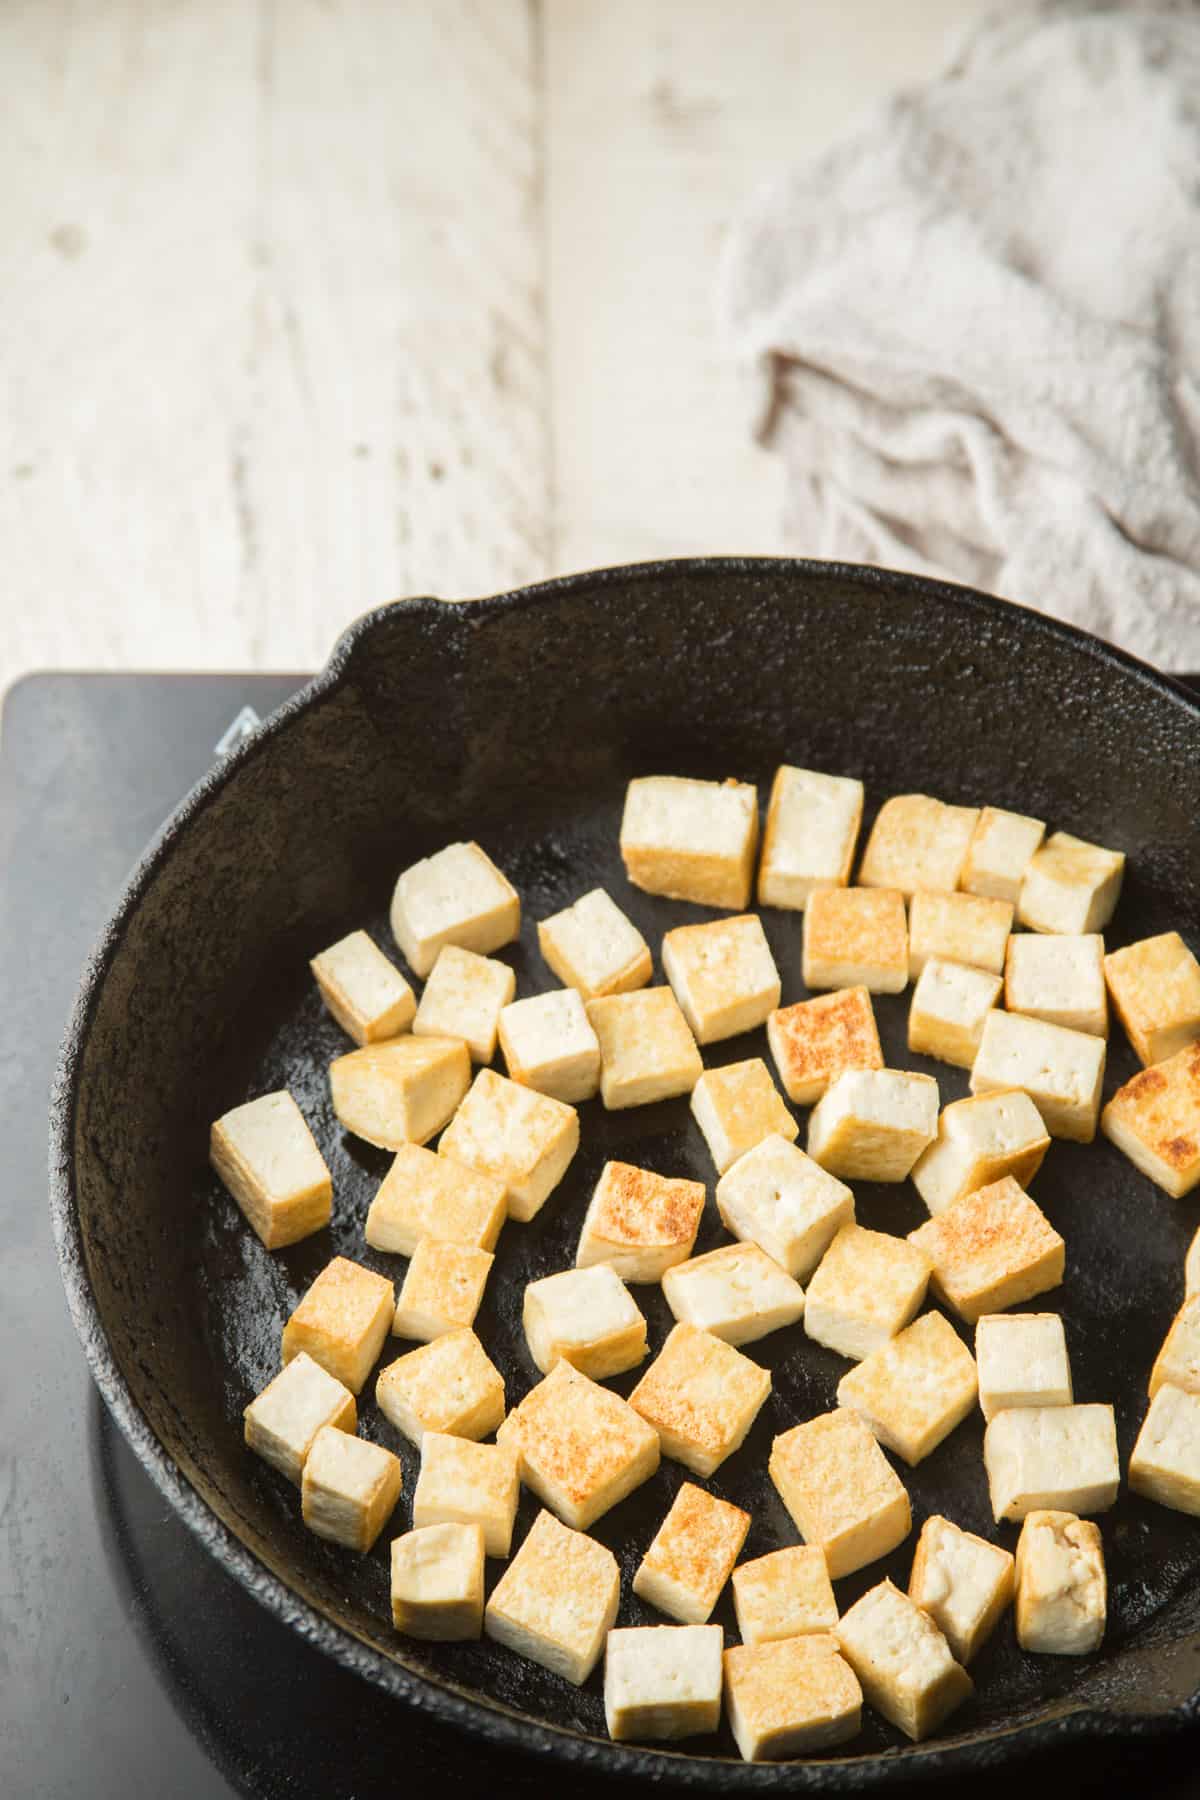 Tofu cubes cooking in a skillet.